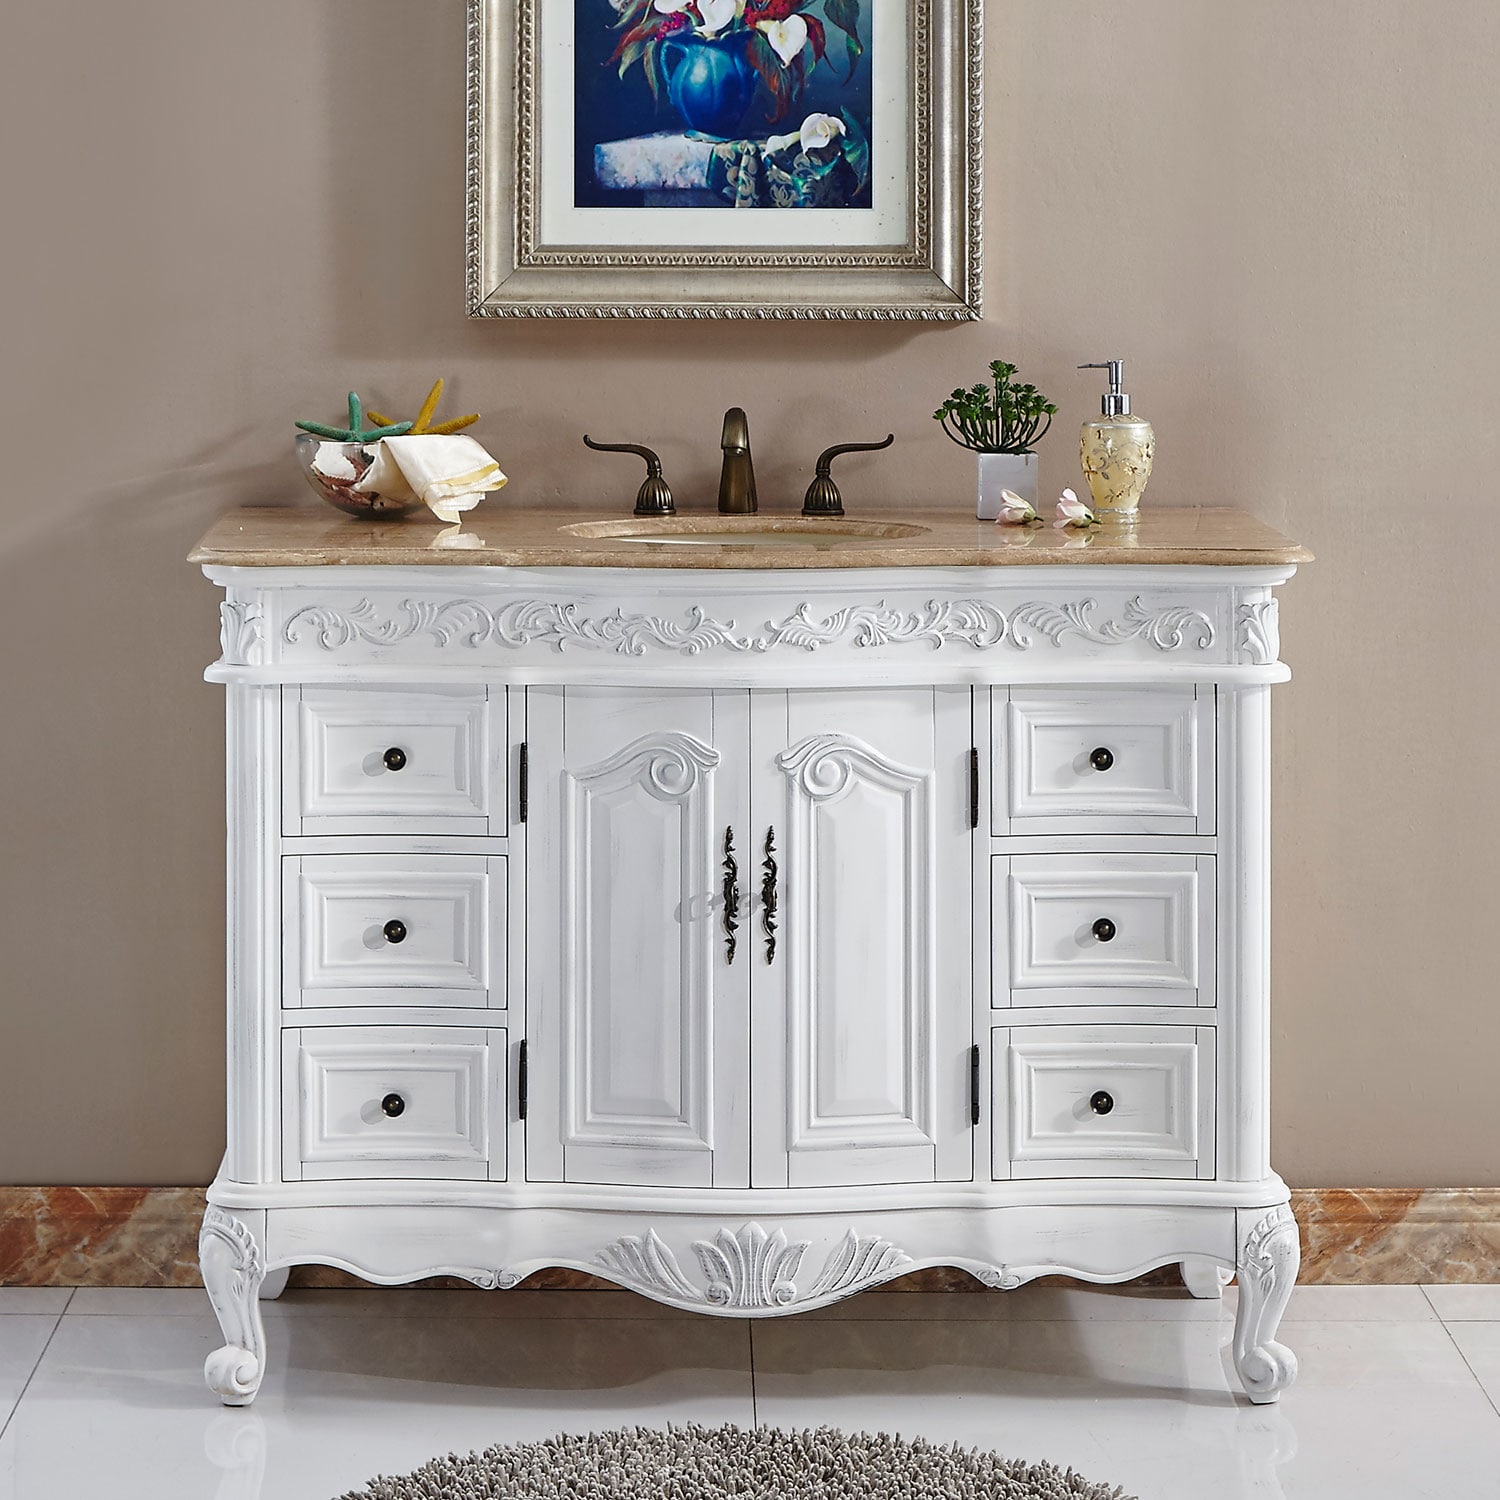 48-in Antique White Undermount Single Sink Bathroom Vanity with Travertine Top in Off-White | - Silkroad Exclusive HYP-0152-T-UIC-48